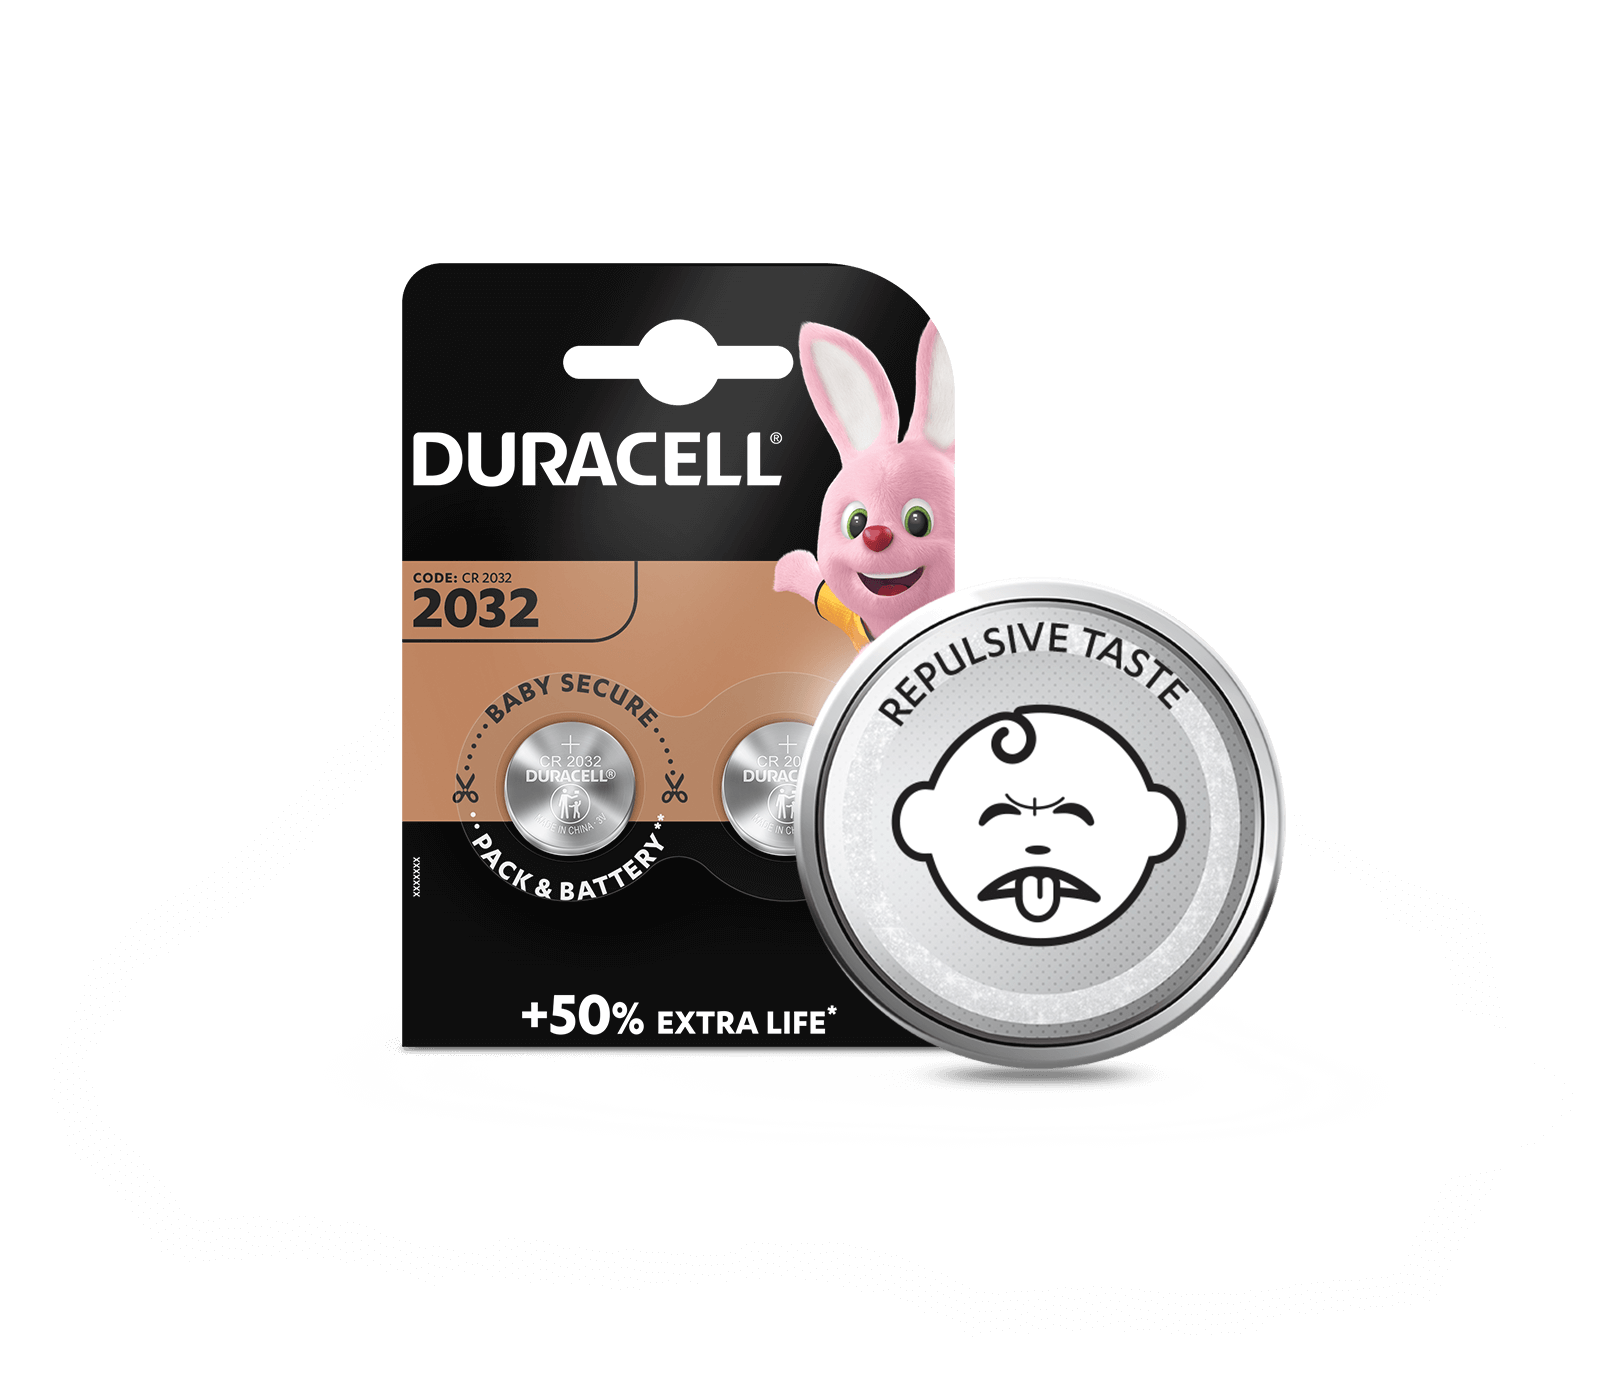 Duracell 3V CR2032 Lithium Coin Button Batteries Twin Box of 6